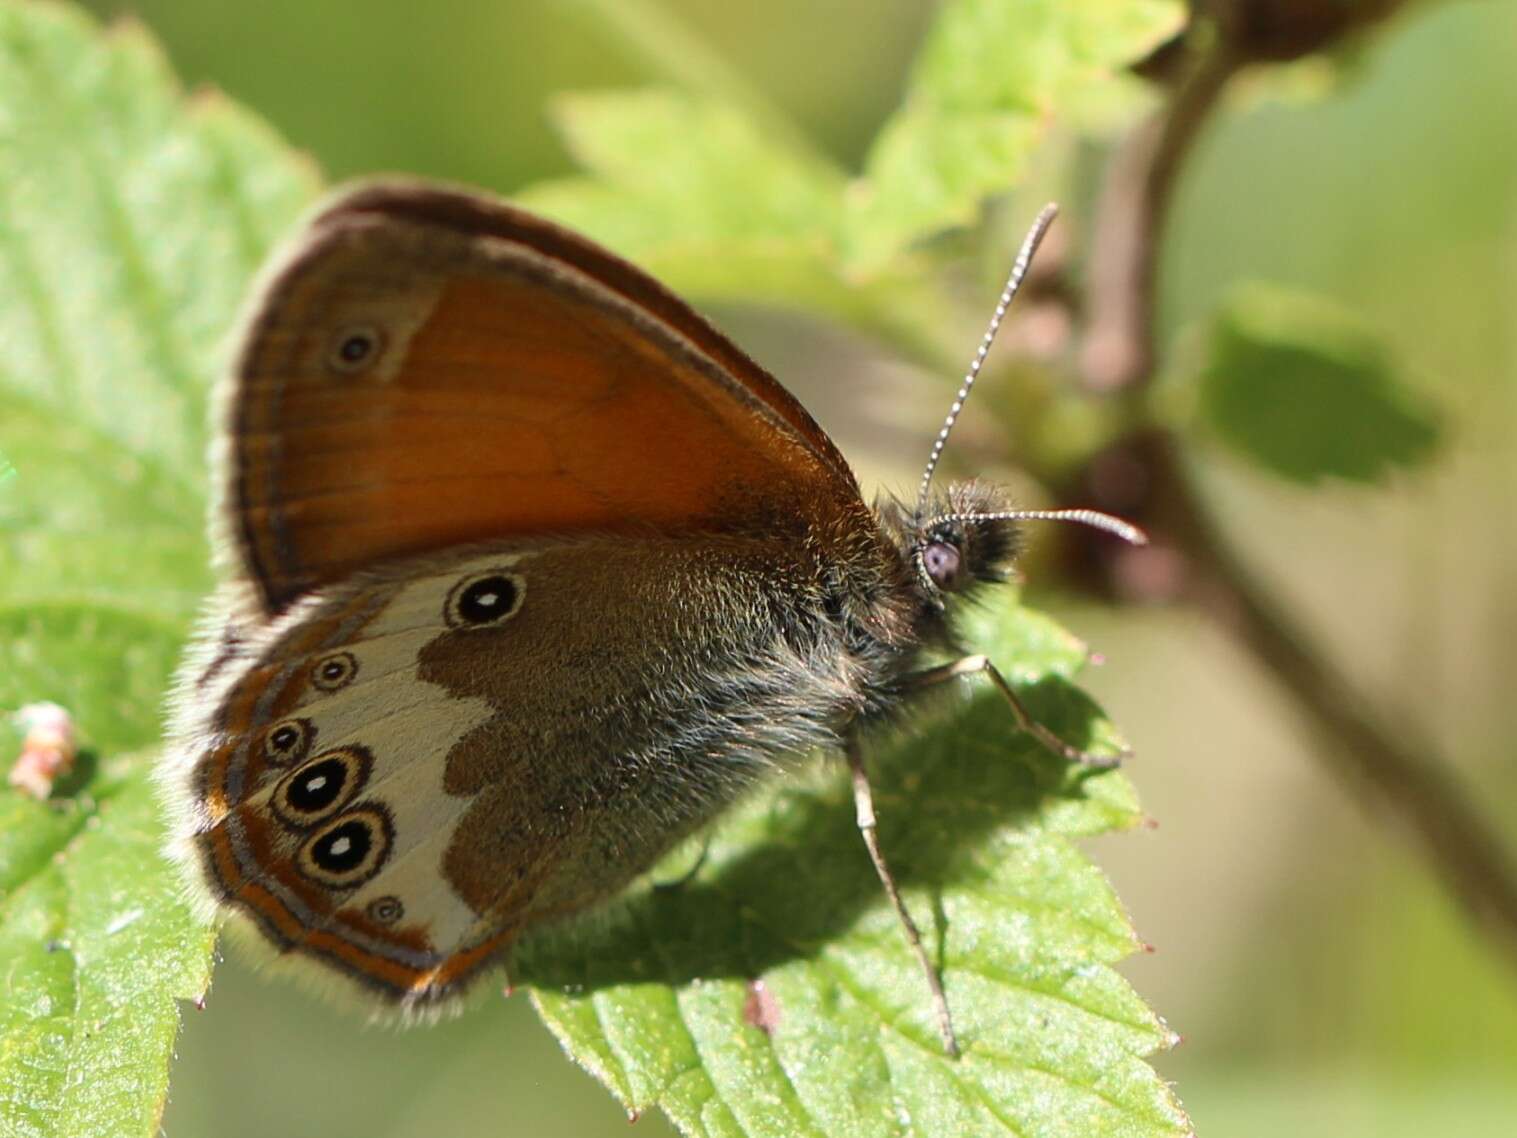 Image of pearly heath